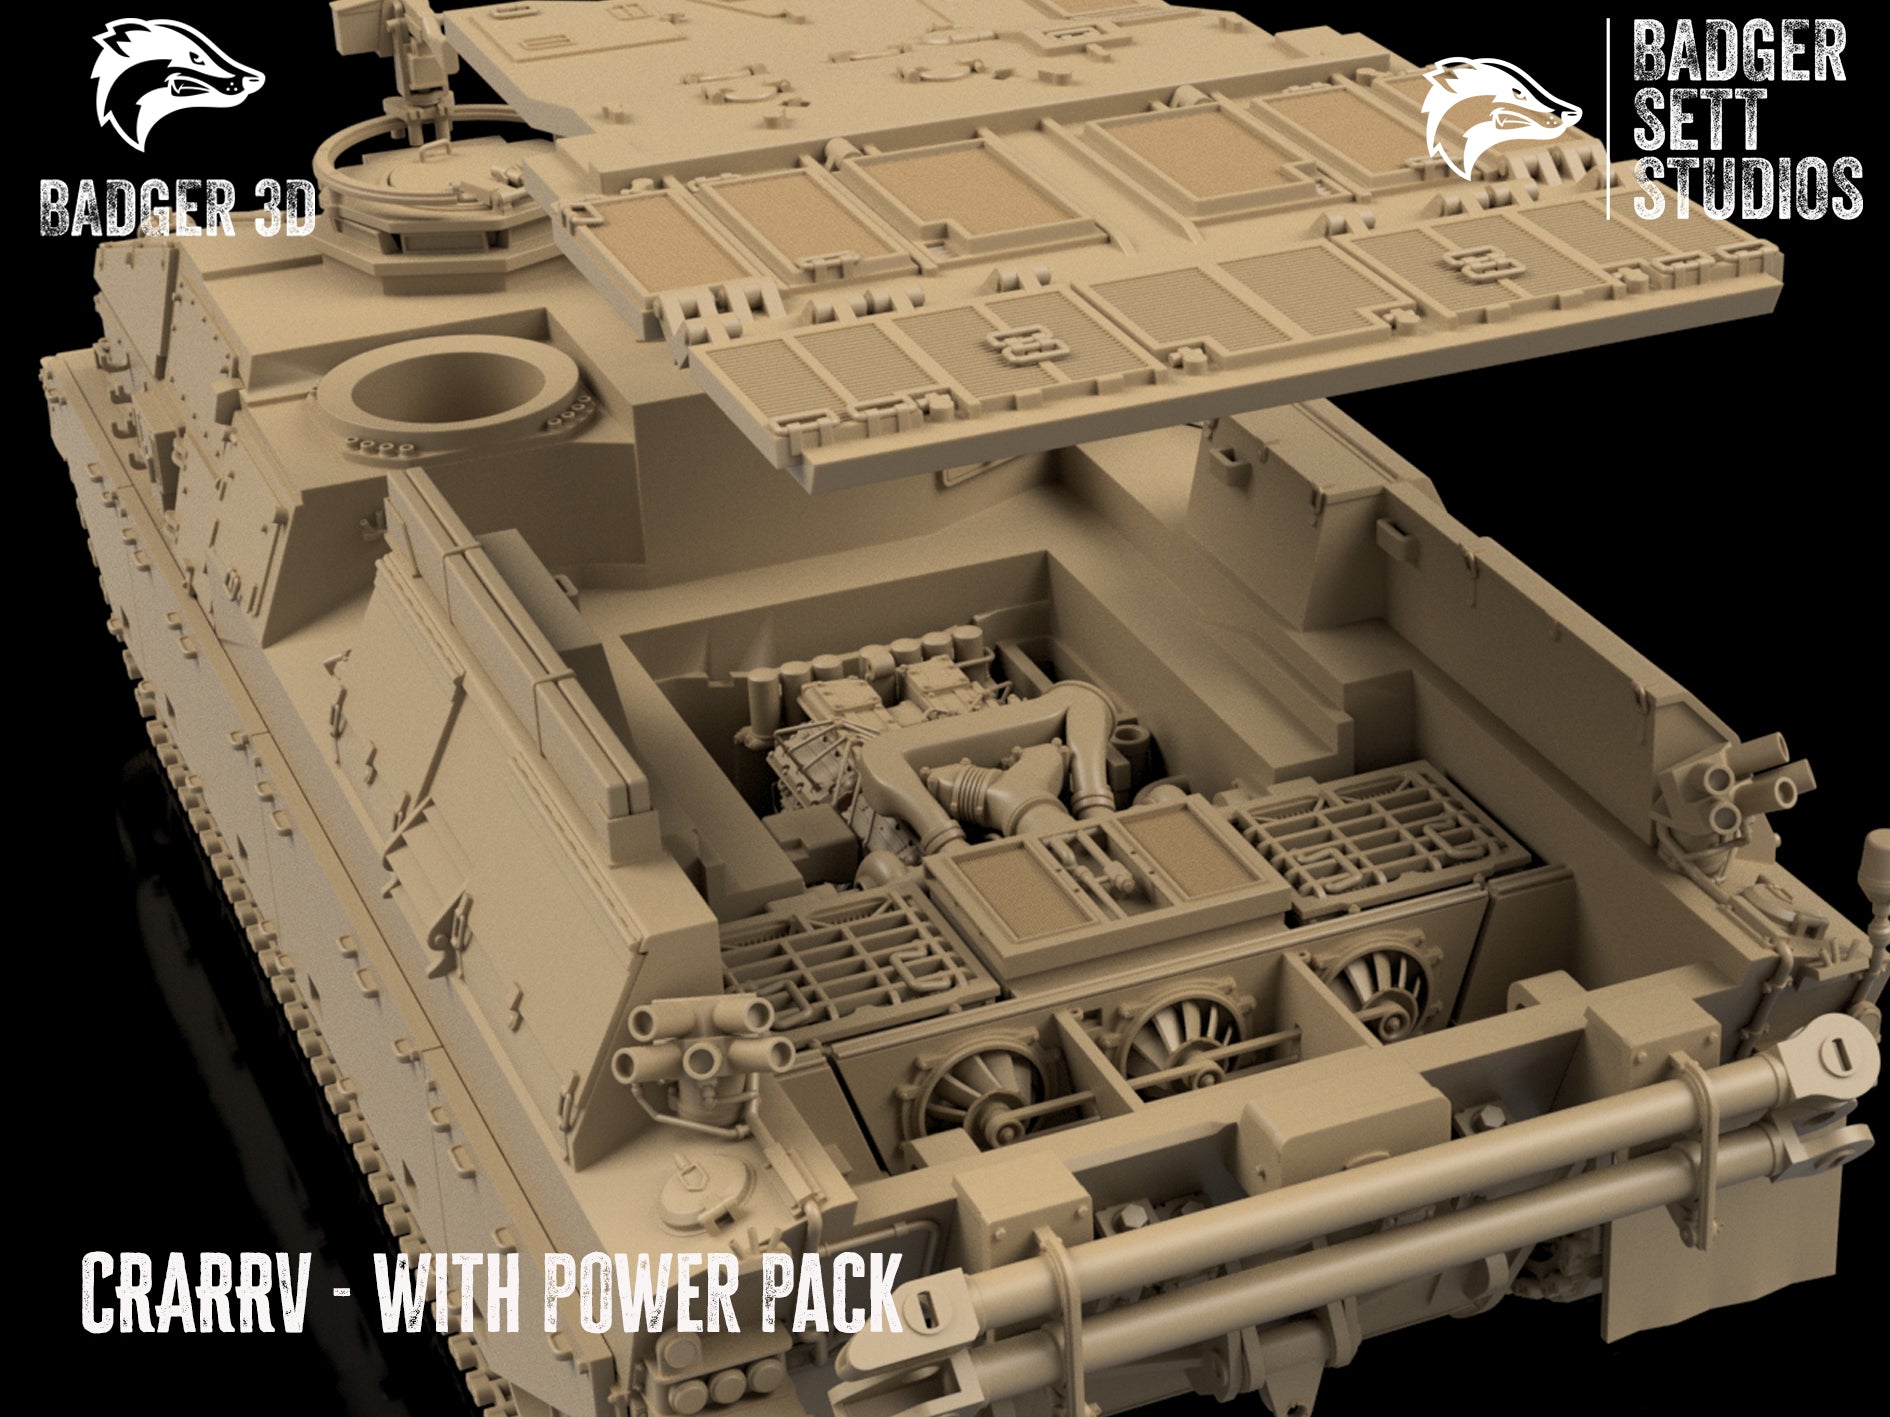 British CRARRV - With Power Pack